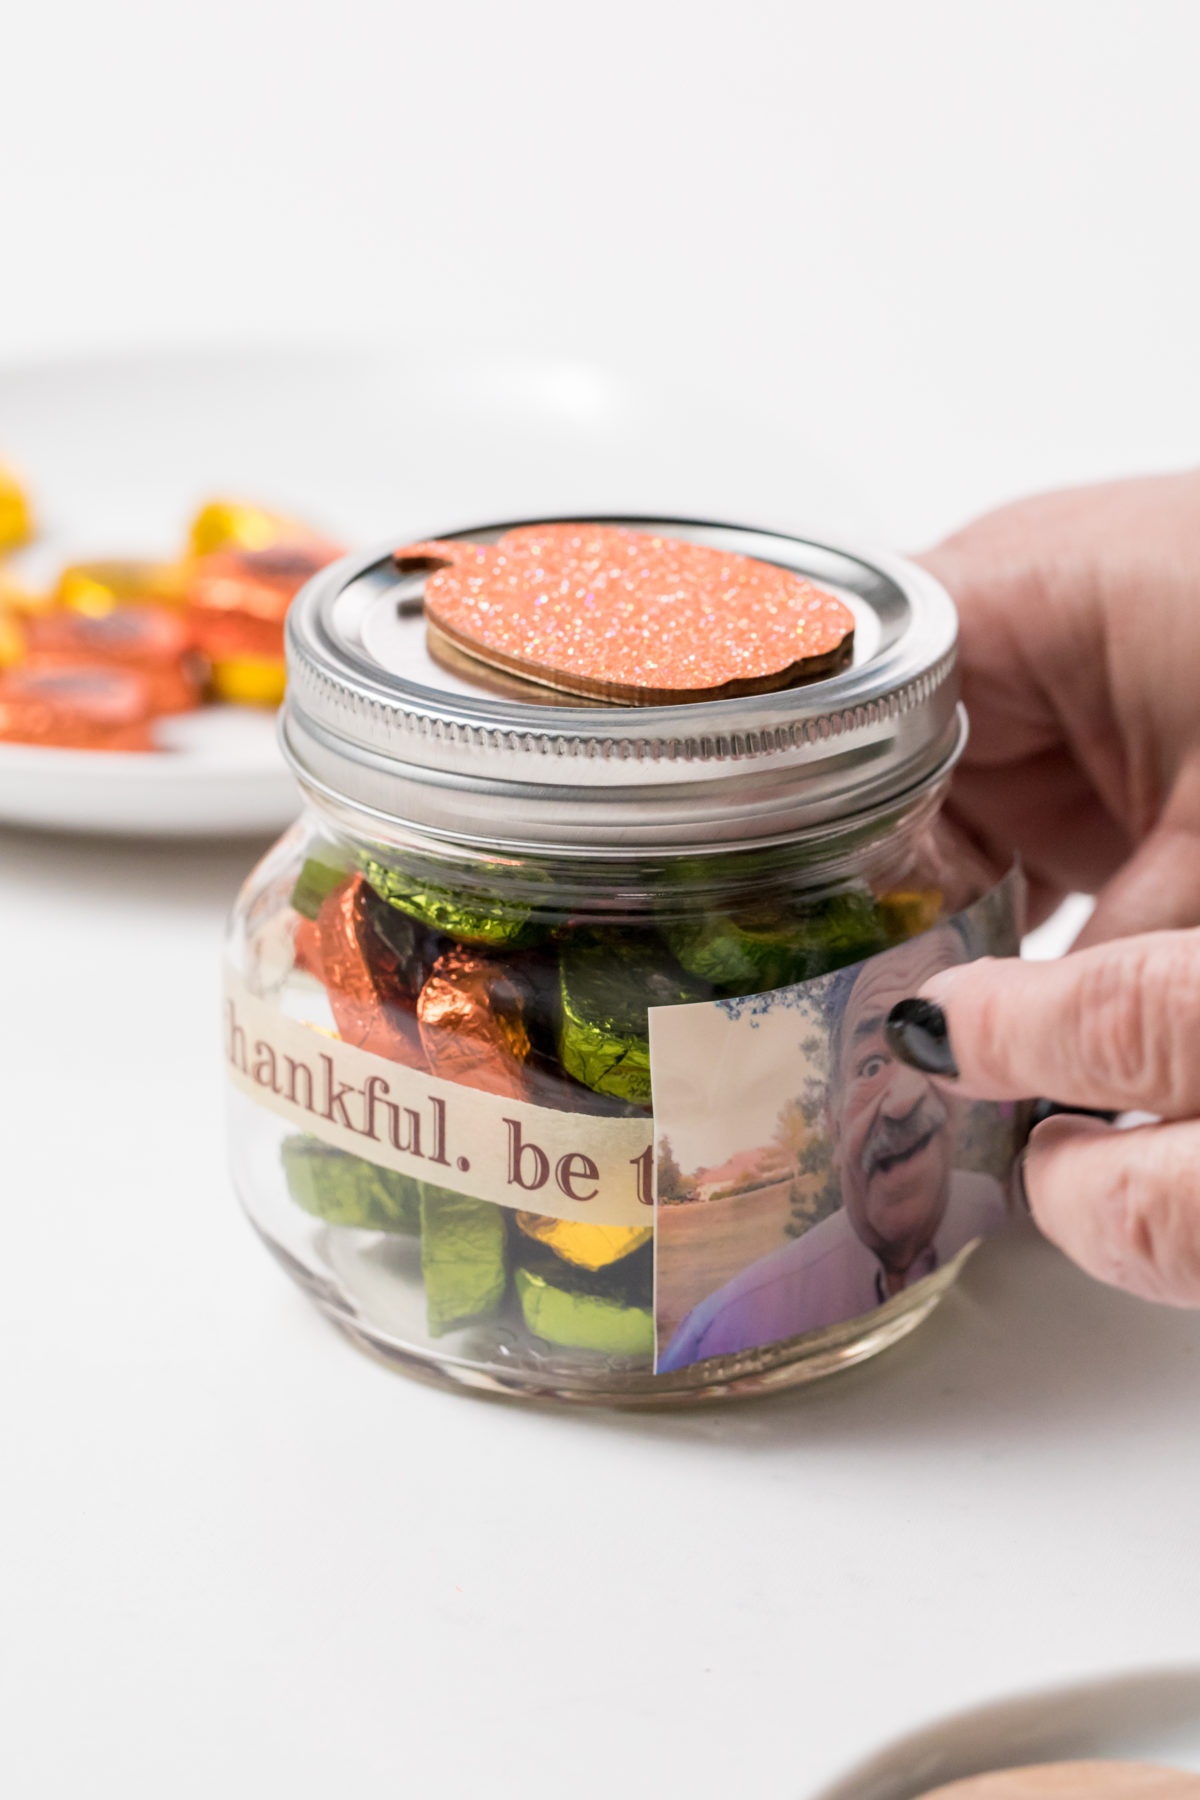 5D4B4675 - Thanksgiving Candy Jars - Decorate the jar